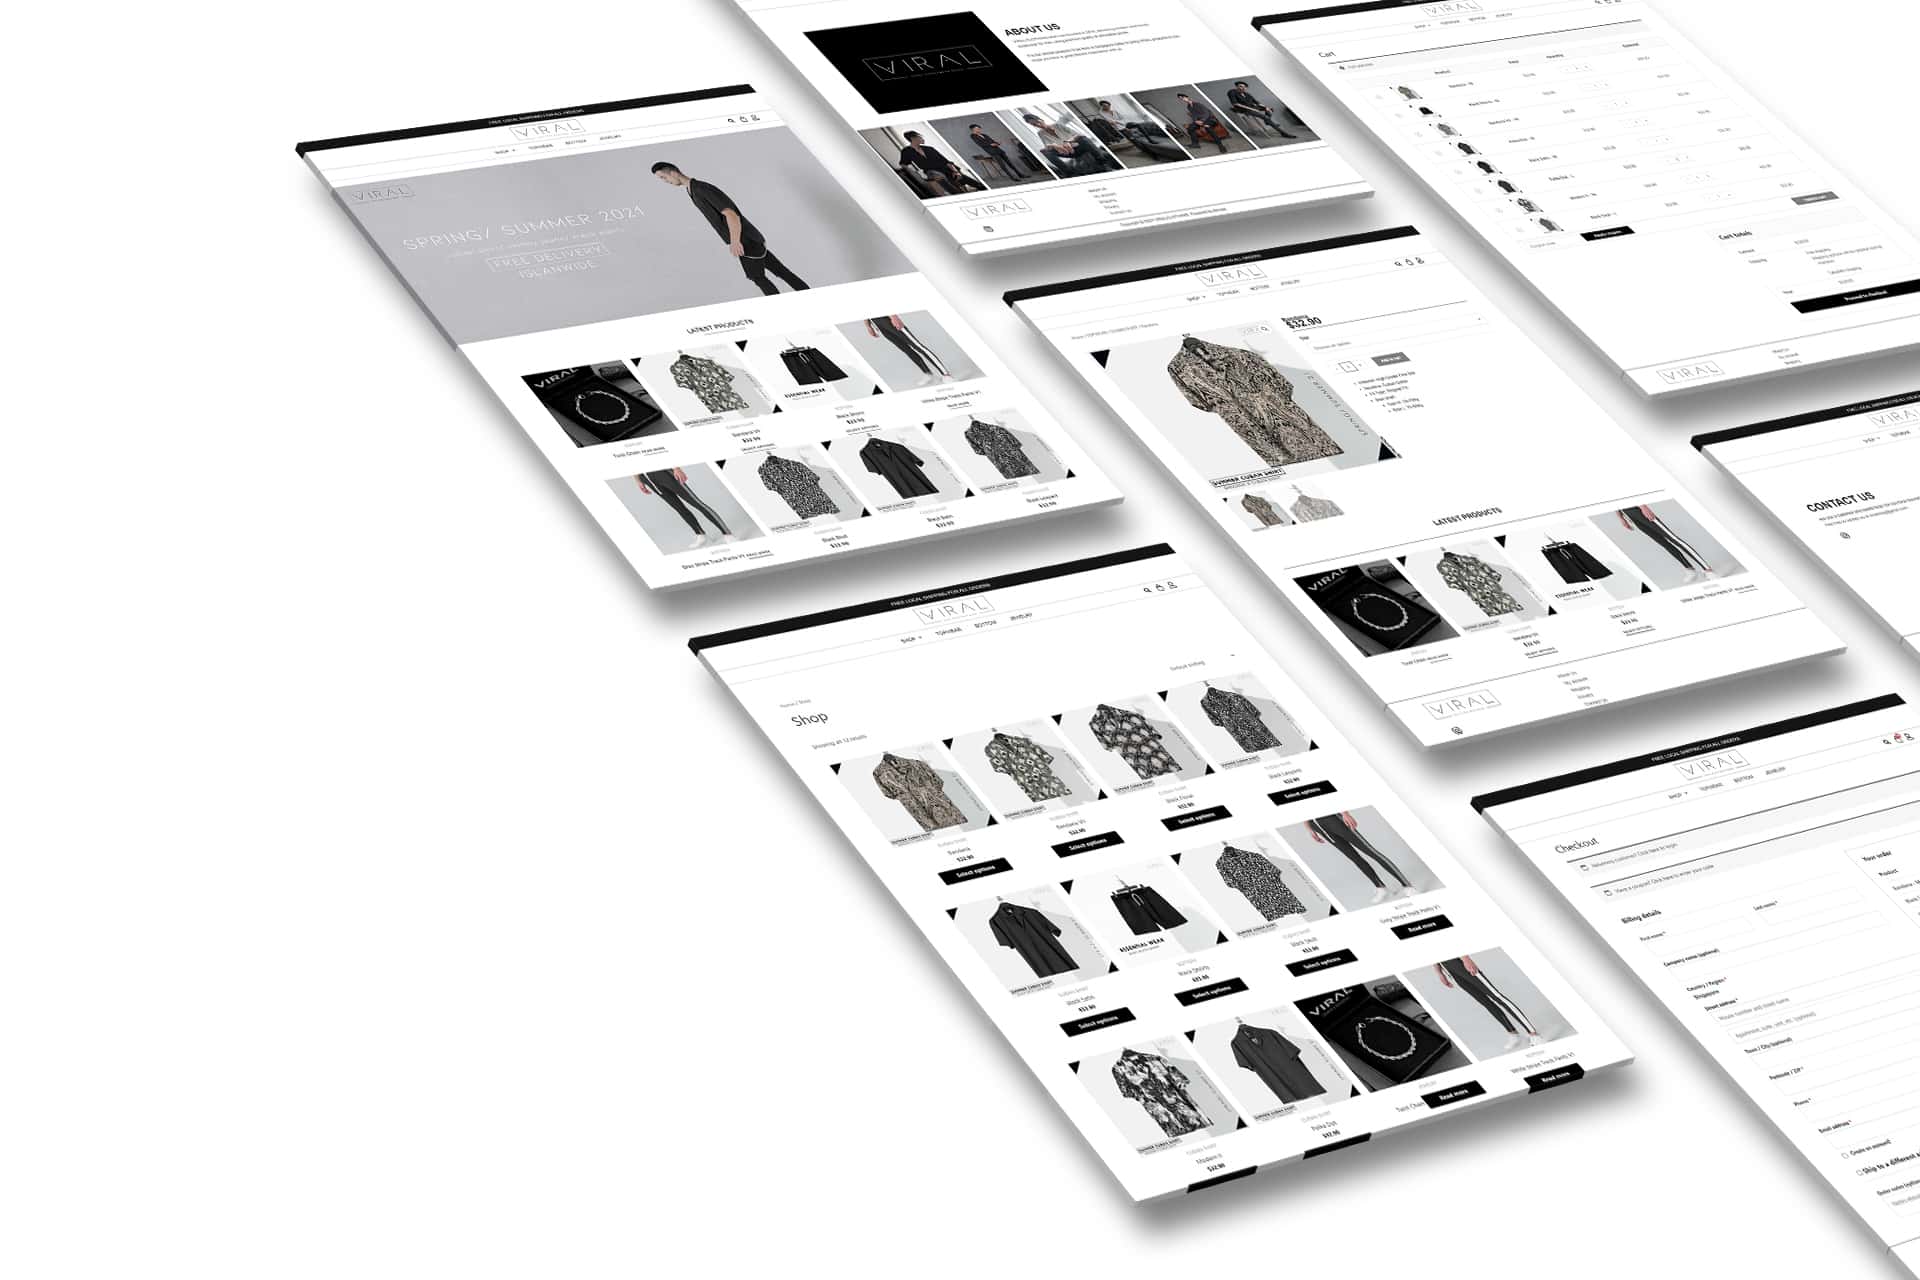 A wordpress-powered fashion website featuring a sleek and modern black and white design.